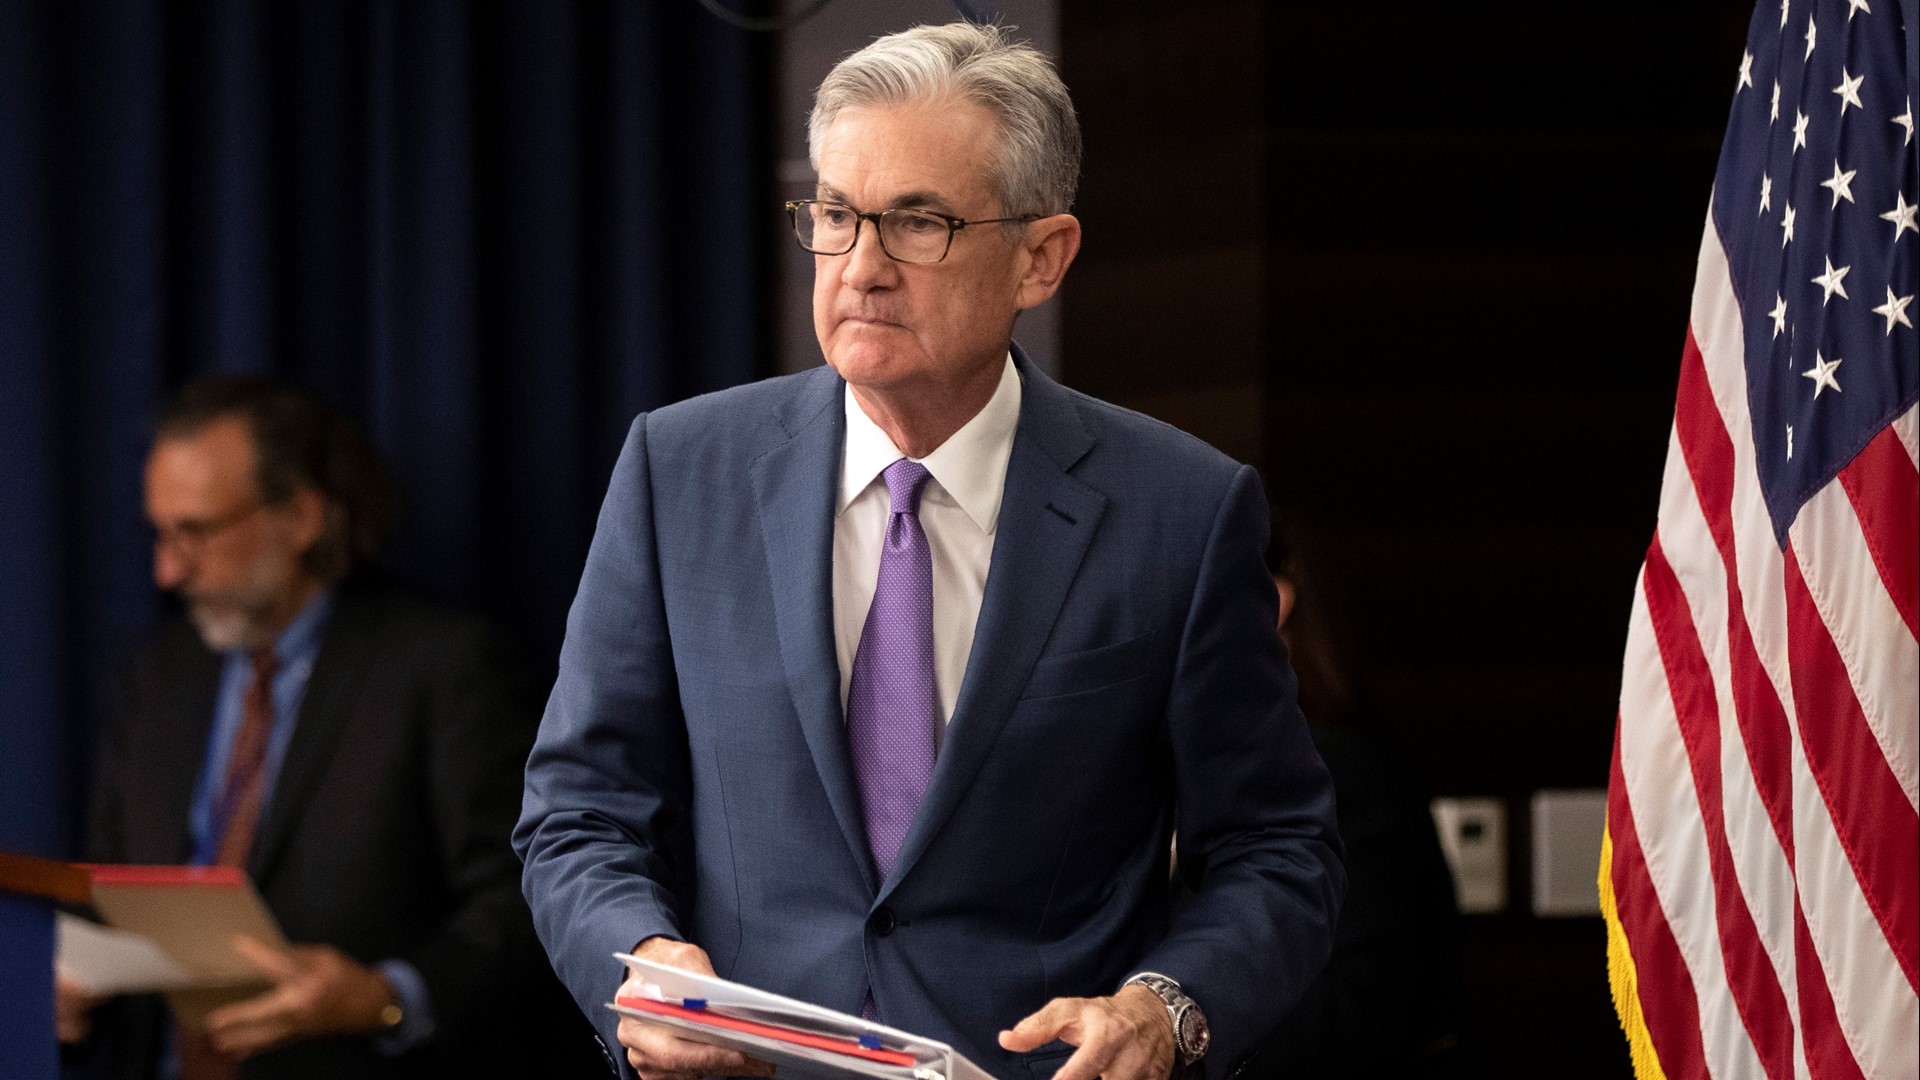 The Federal Reserve cut interest rates for the first time since the 2008 recession. We know talking economics can make people's eyes glaze over. But what happened Wednesday is a BIG deal. So, what does it mean? Why now? And what happens next? Let's Connect the Dots!